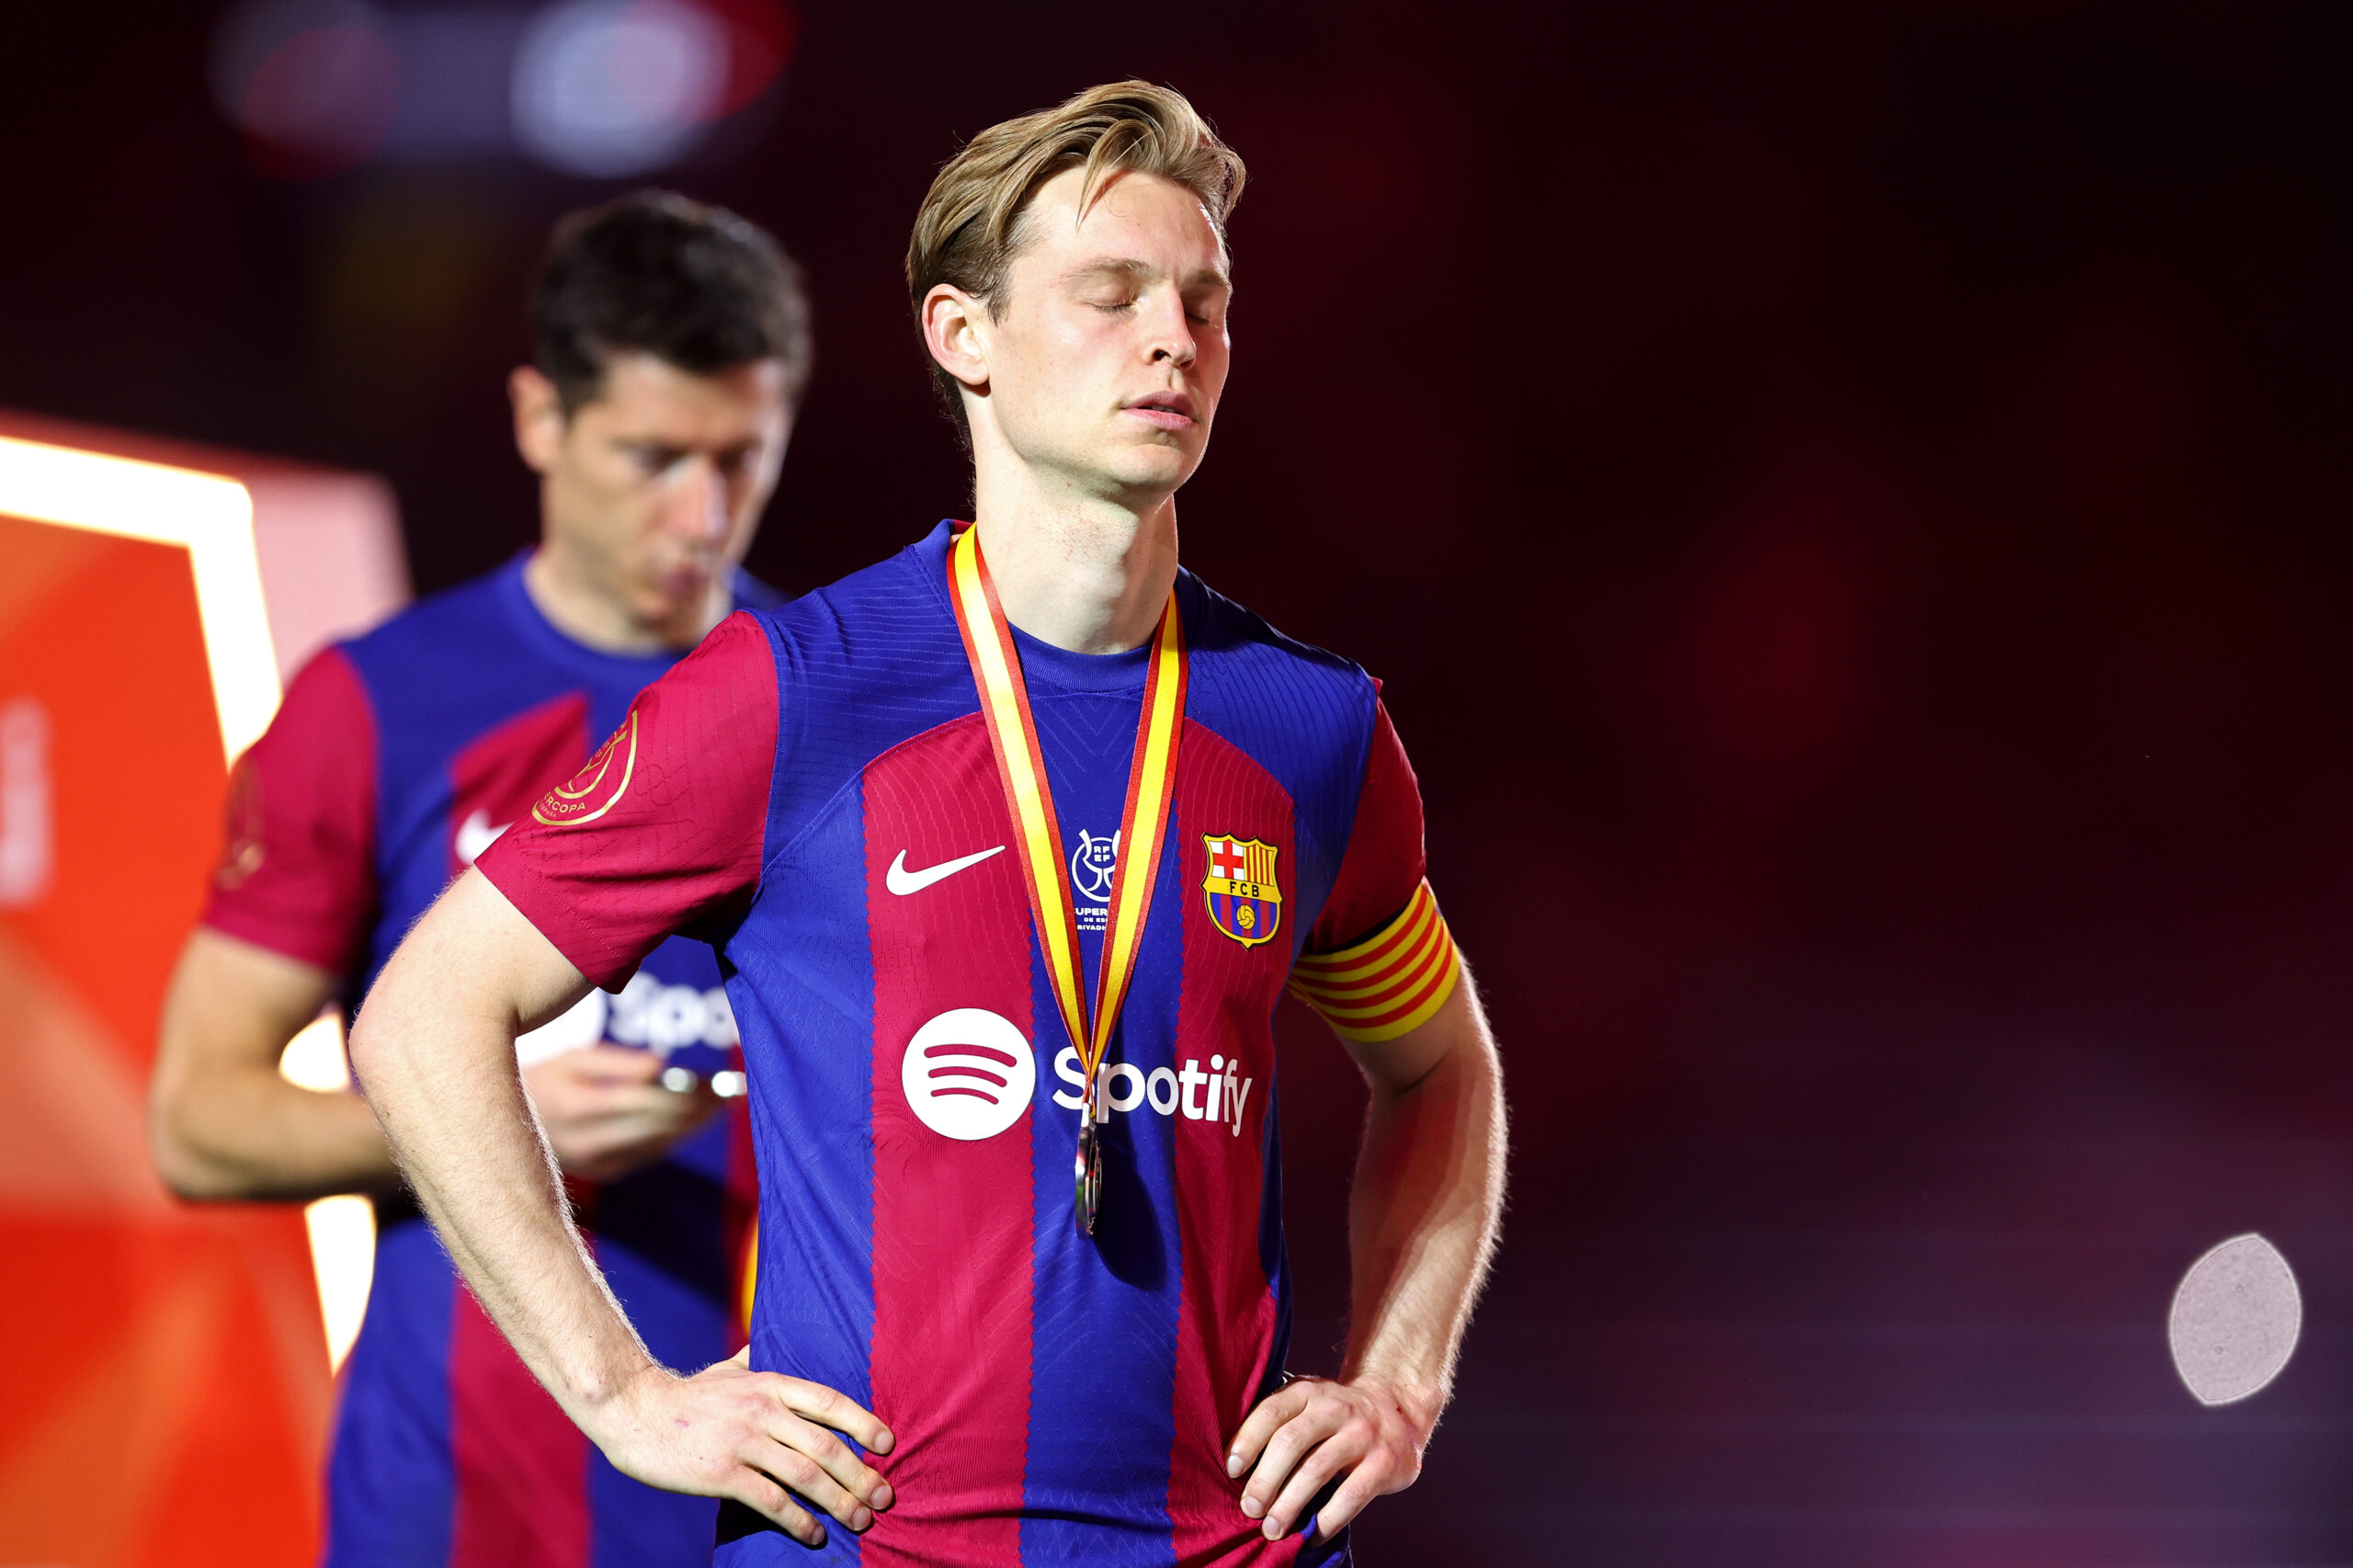 RIYADH, SAUDI ARABIA - JANUARY 14: Frenkie de Jong of FC Barcelona looks dejected with his runners-up medal after the team's defeat in the Super Copa de España Final match between Real Madrid and FC Barcelona on January 14, 2024 in Riyadh, Saudi Arabia.